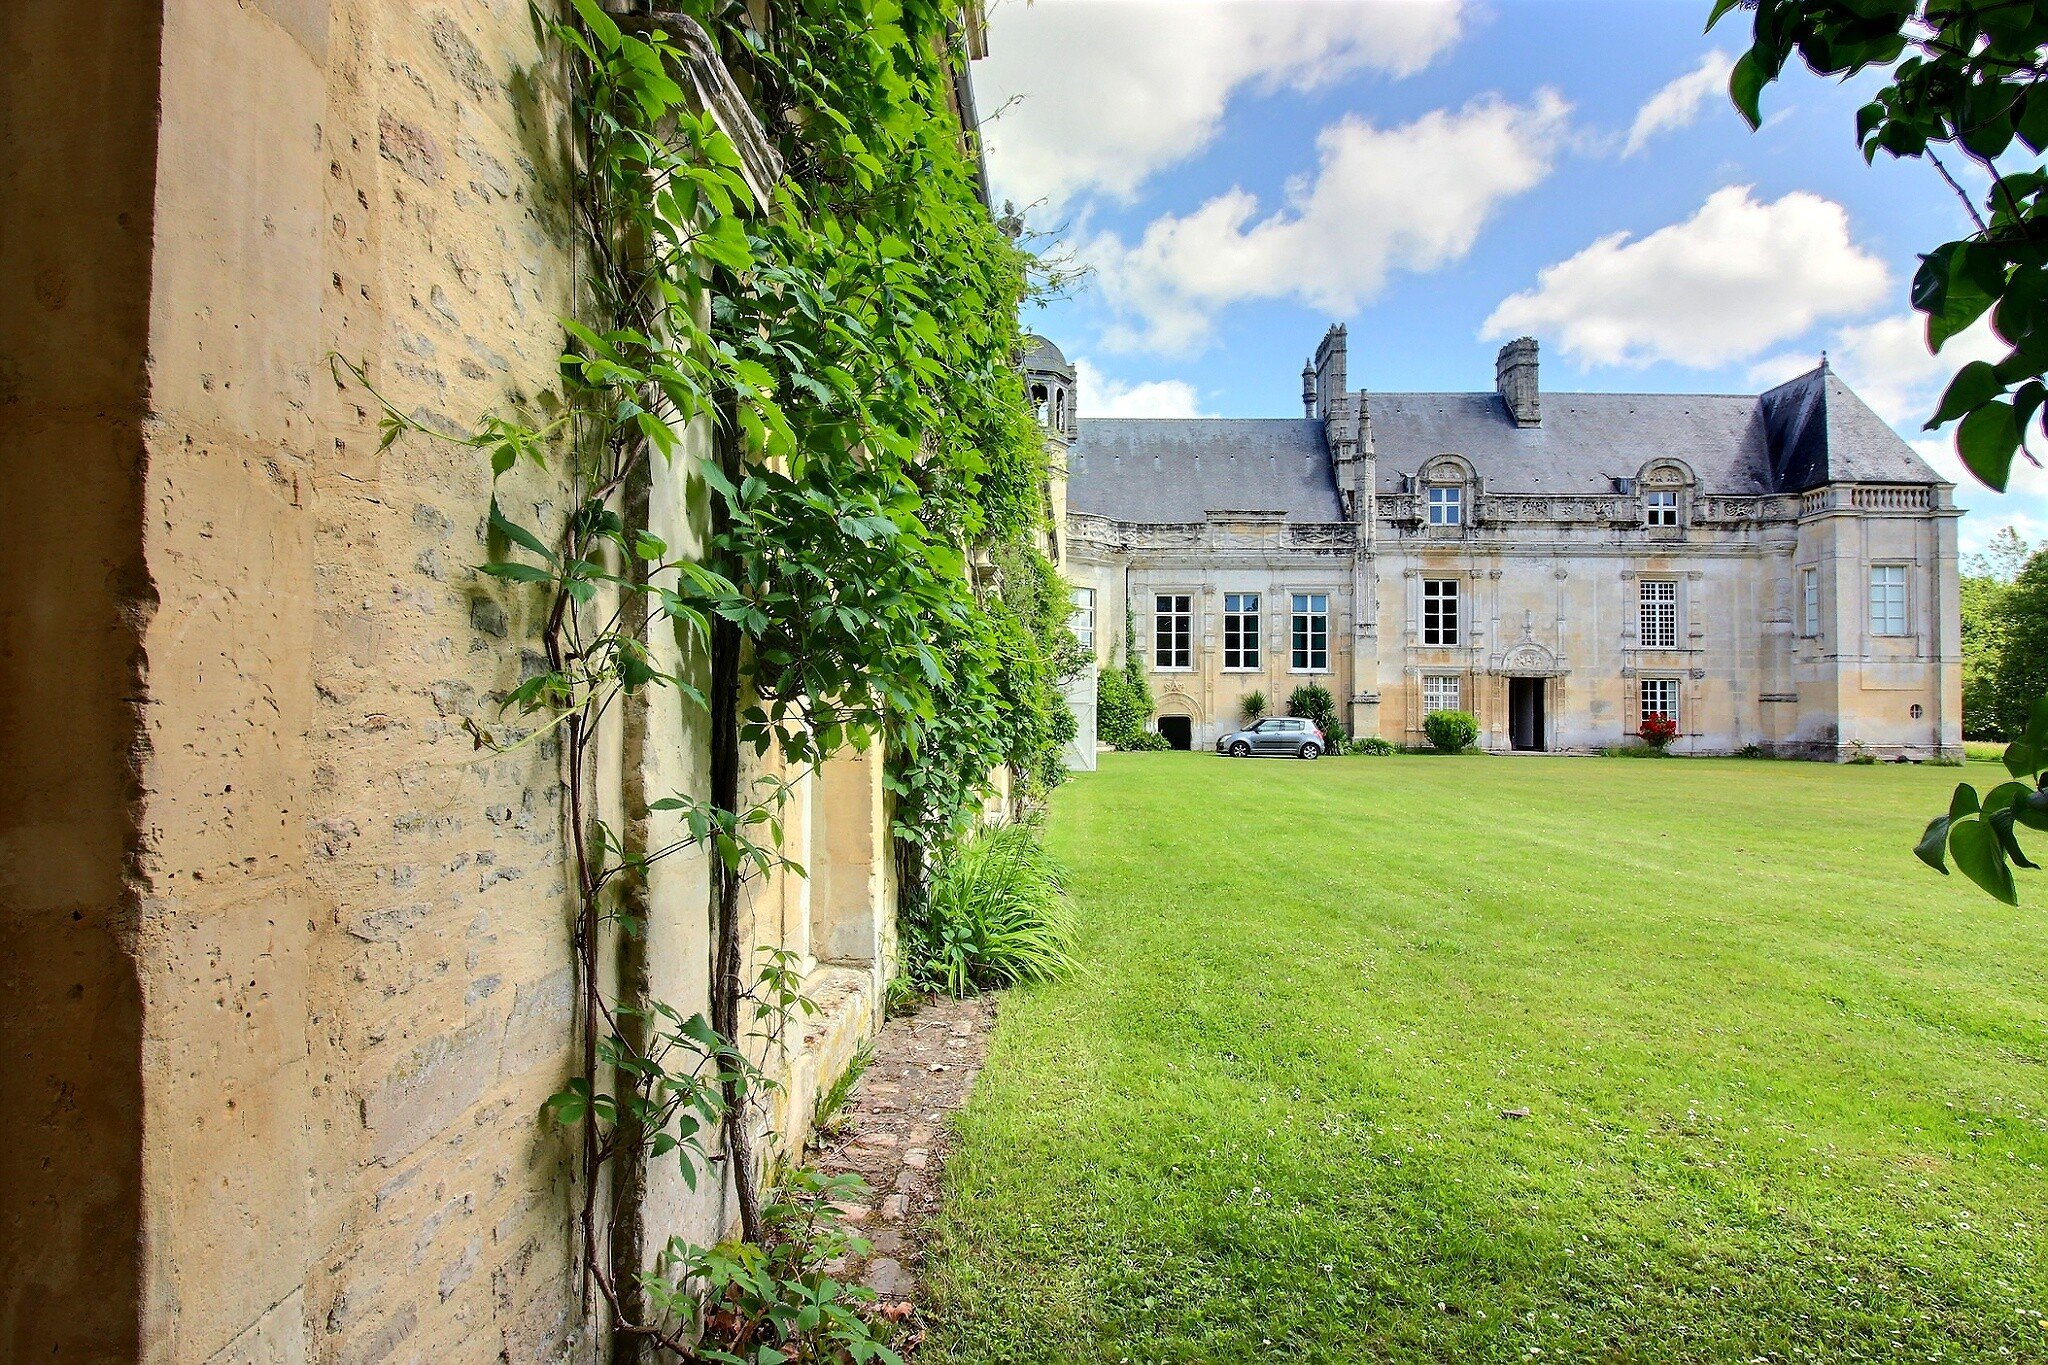 Francis York Renaissance Chateau in Normandy, France Listed for €1.5M  5.jpg